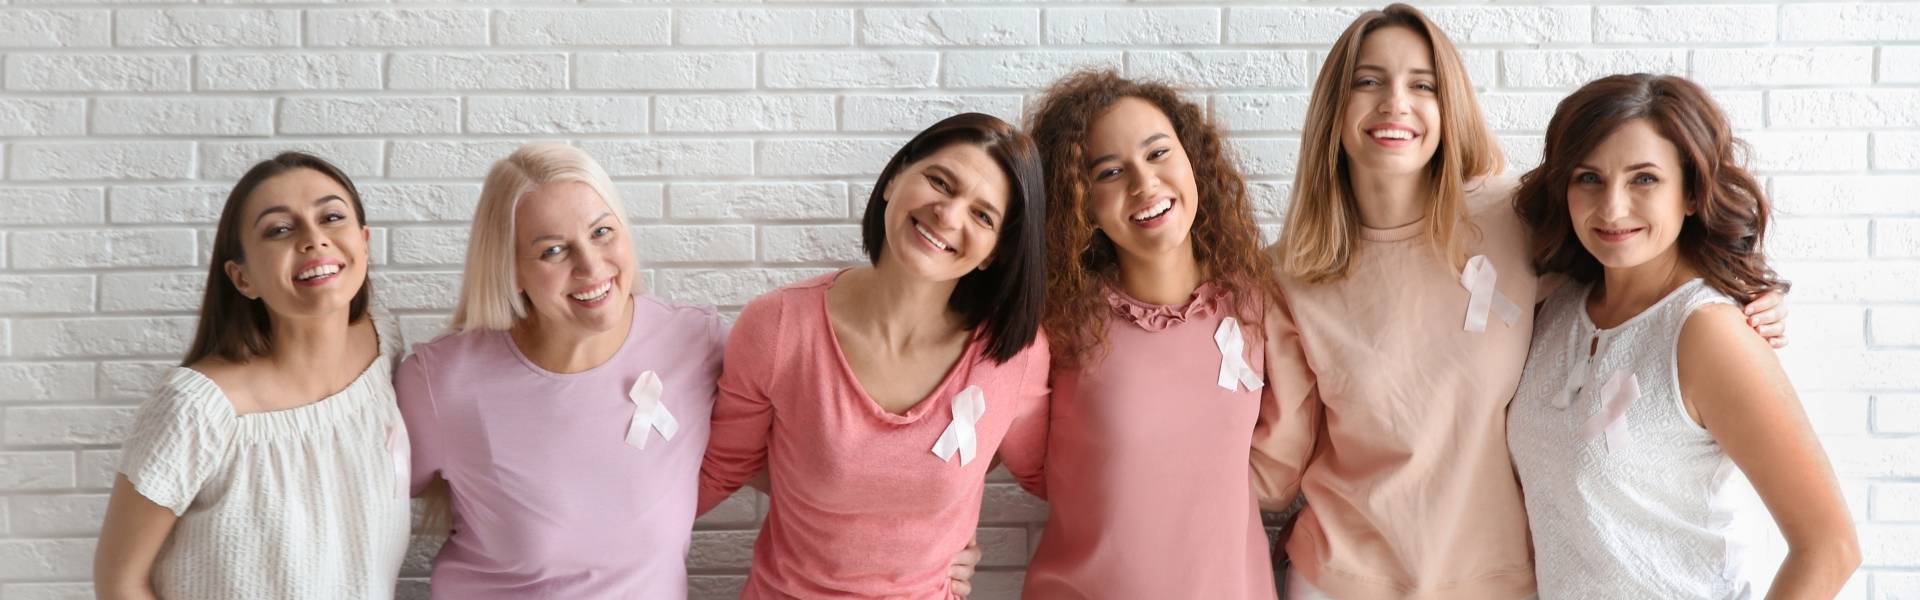 group of women advocating for breast cancer awareness